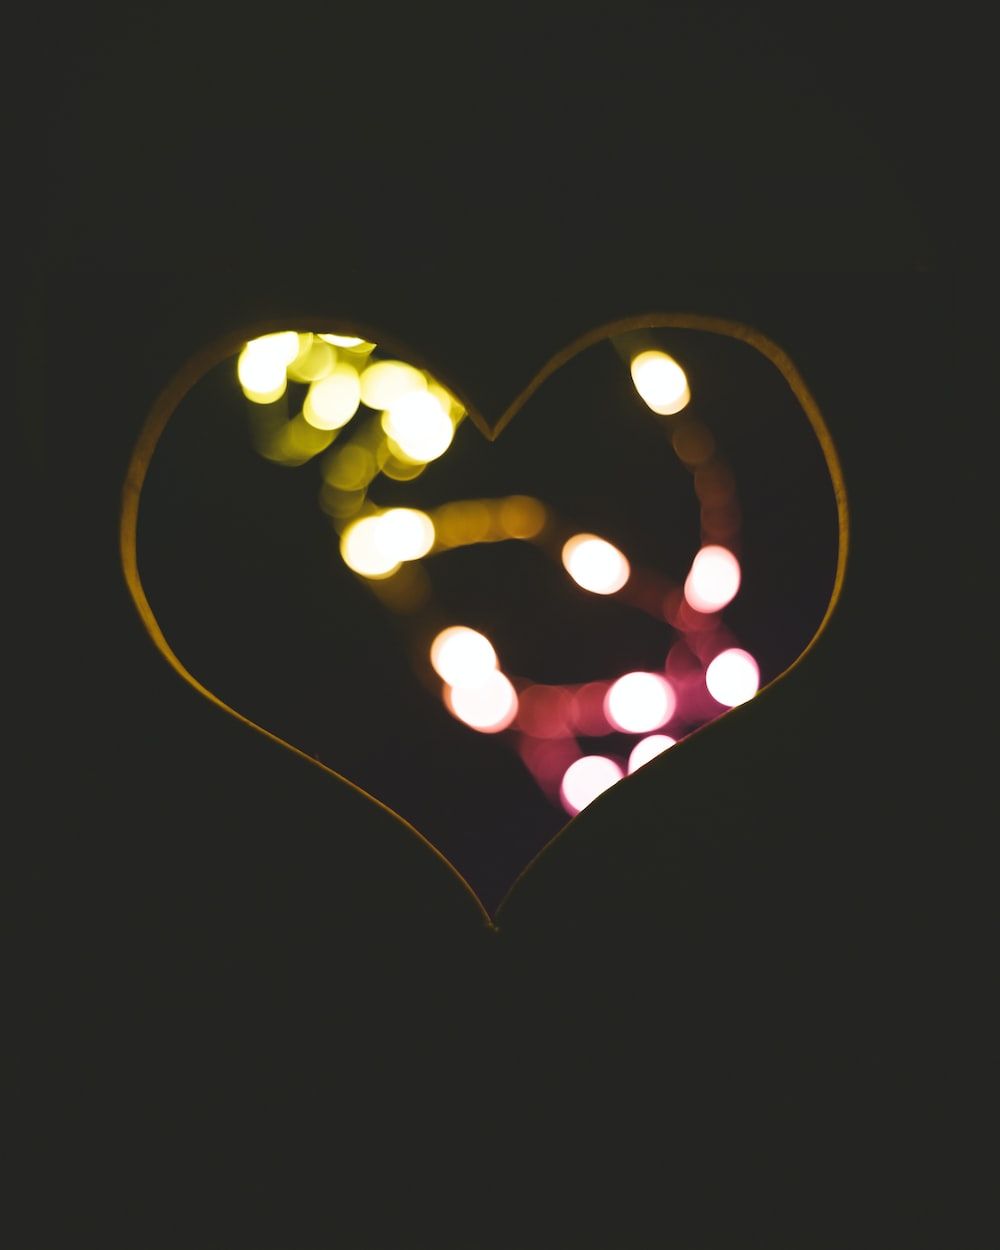 Dark Heart Picture. Download Free Image